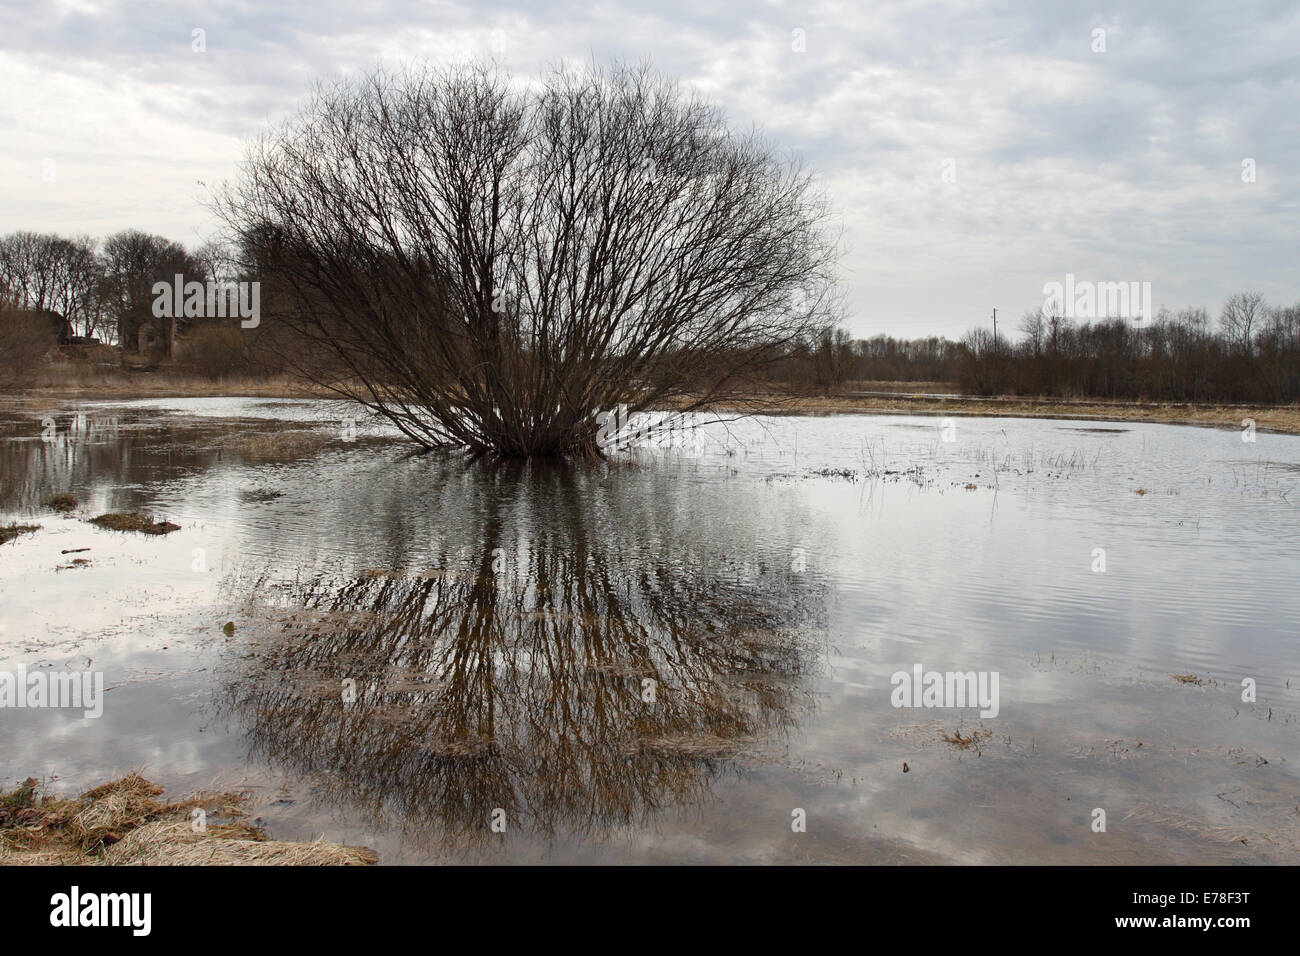 Bare spring bush reflects in the water under cloudy sky Stock Photo